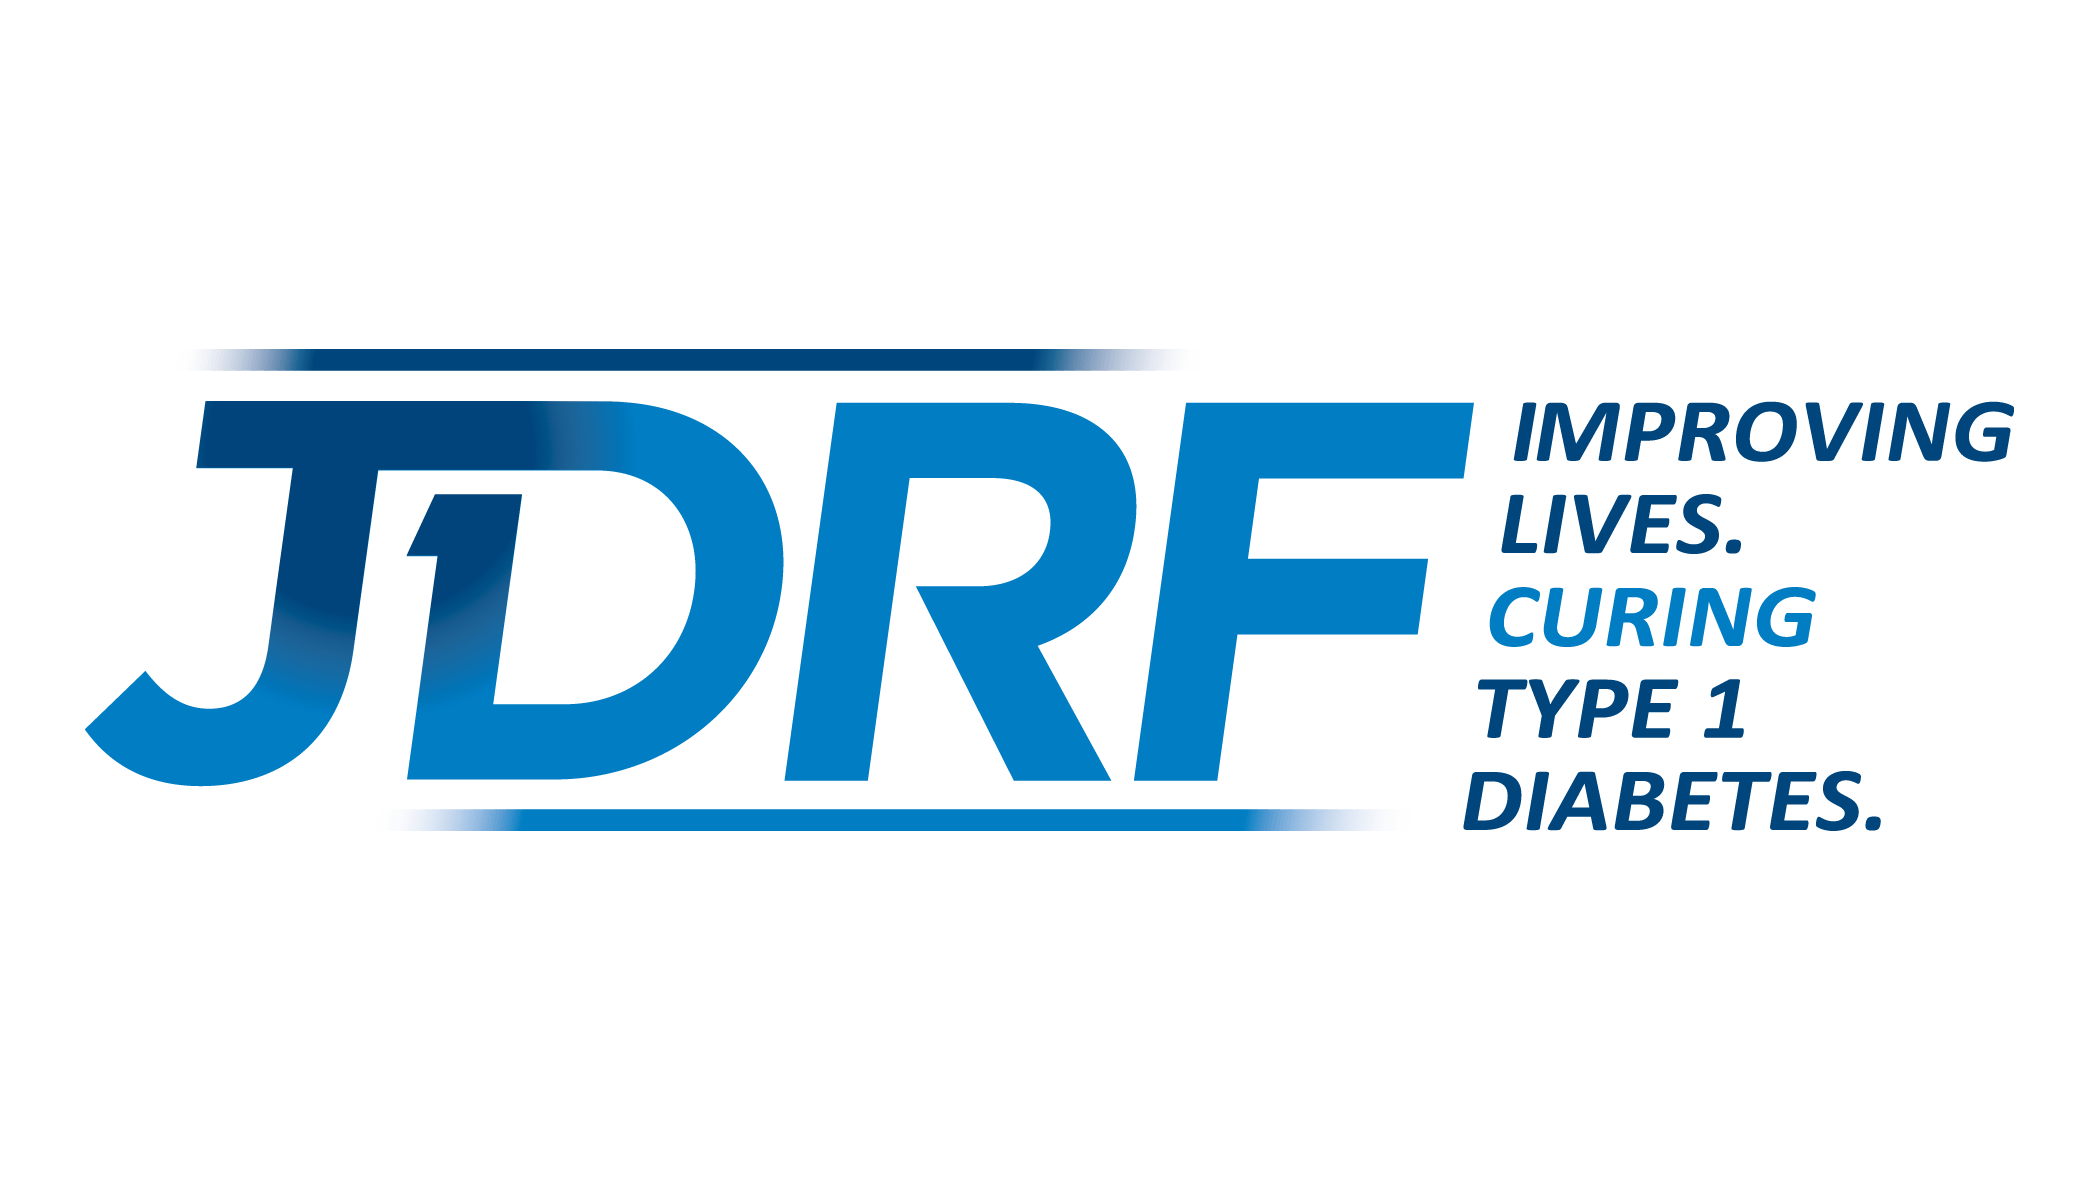 JDRF Logo - JDRF, the type 1 diabetes charity. Funding research to cure type 1